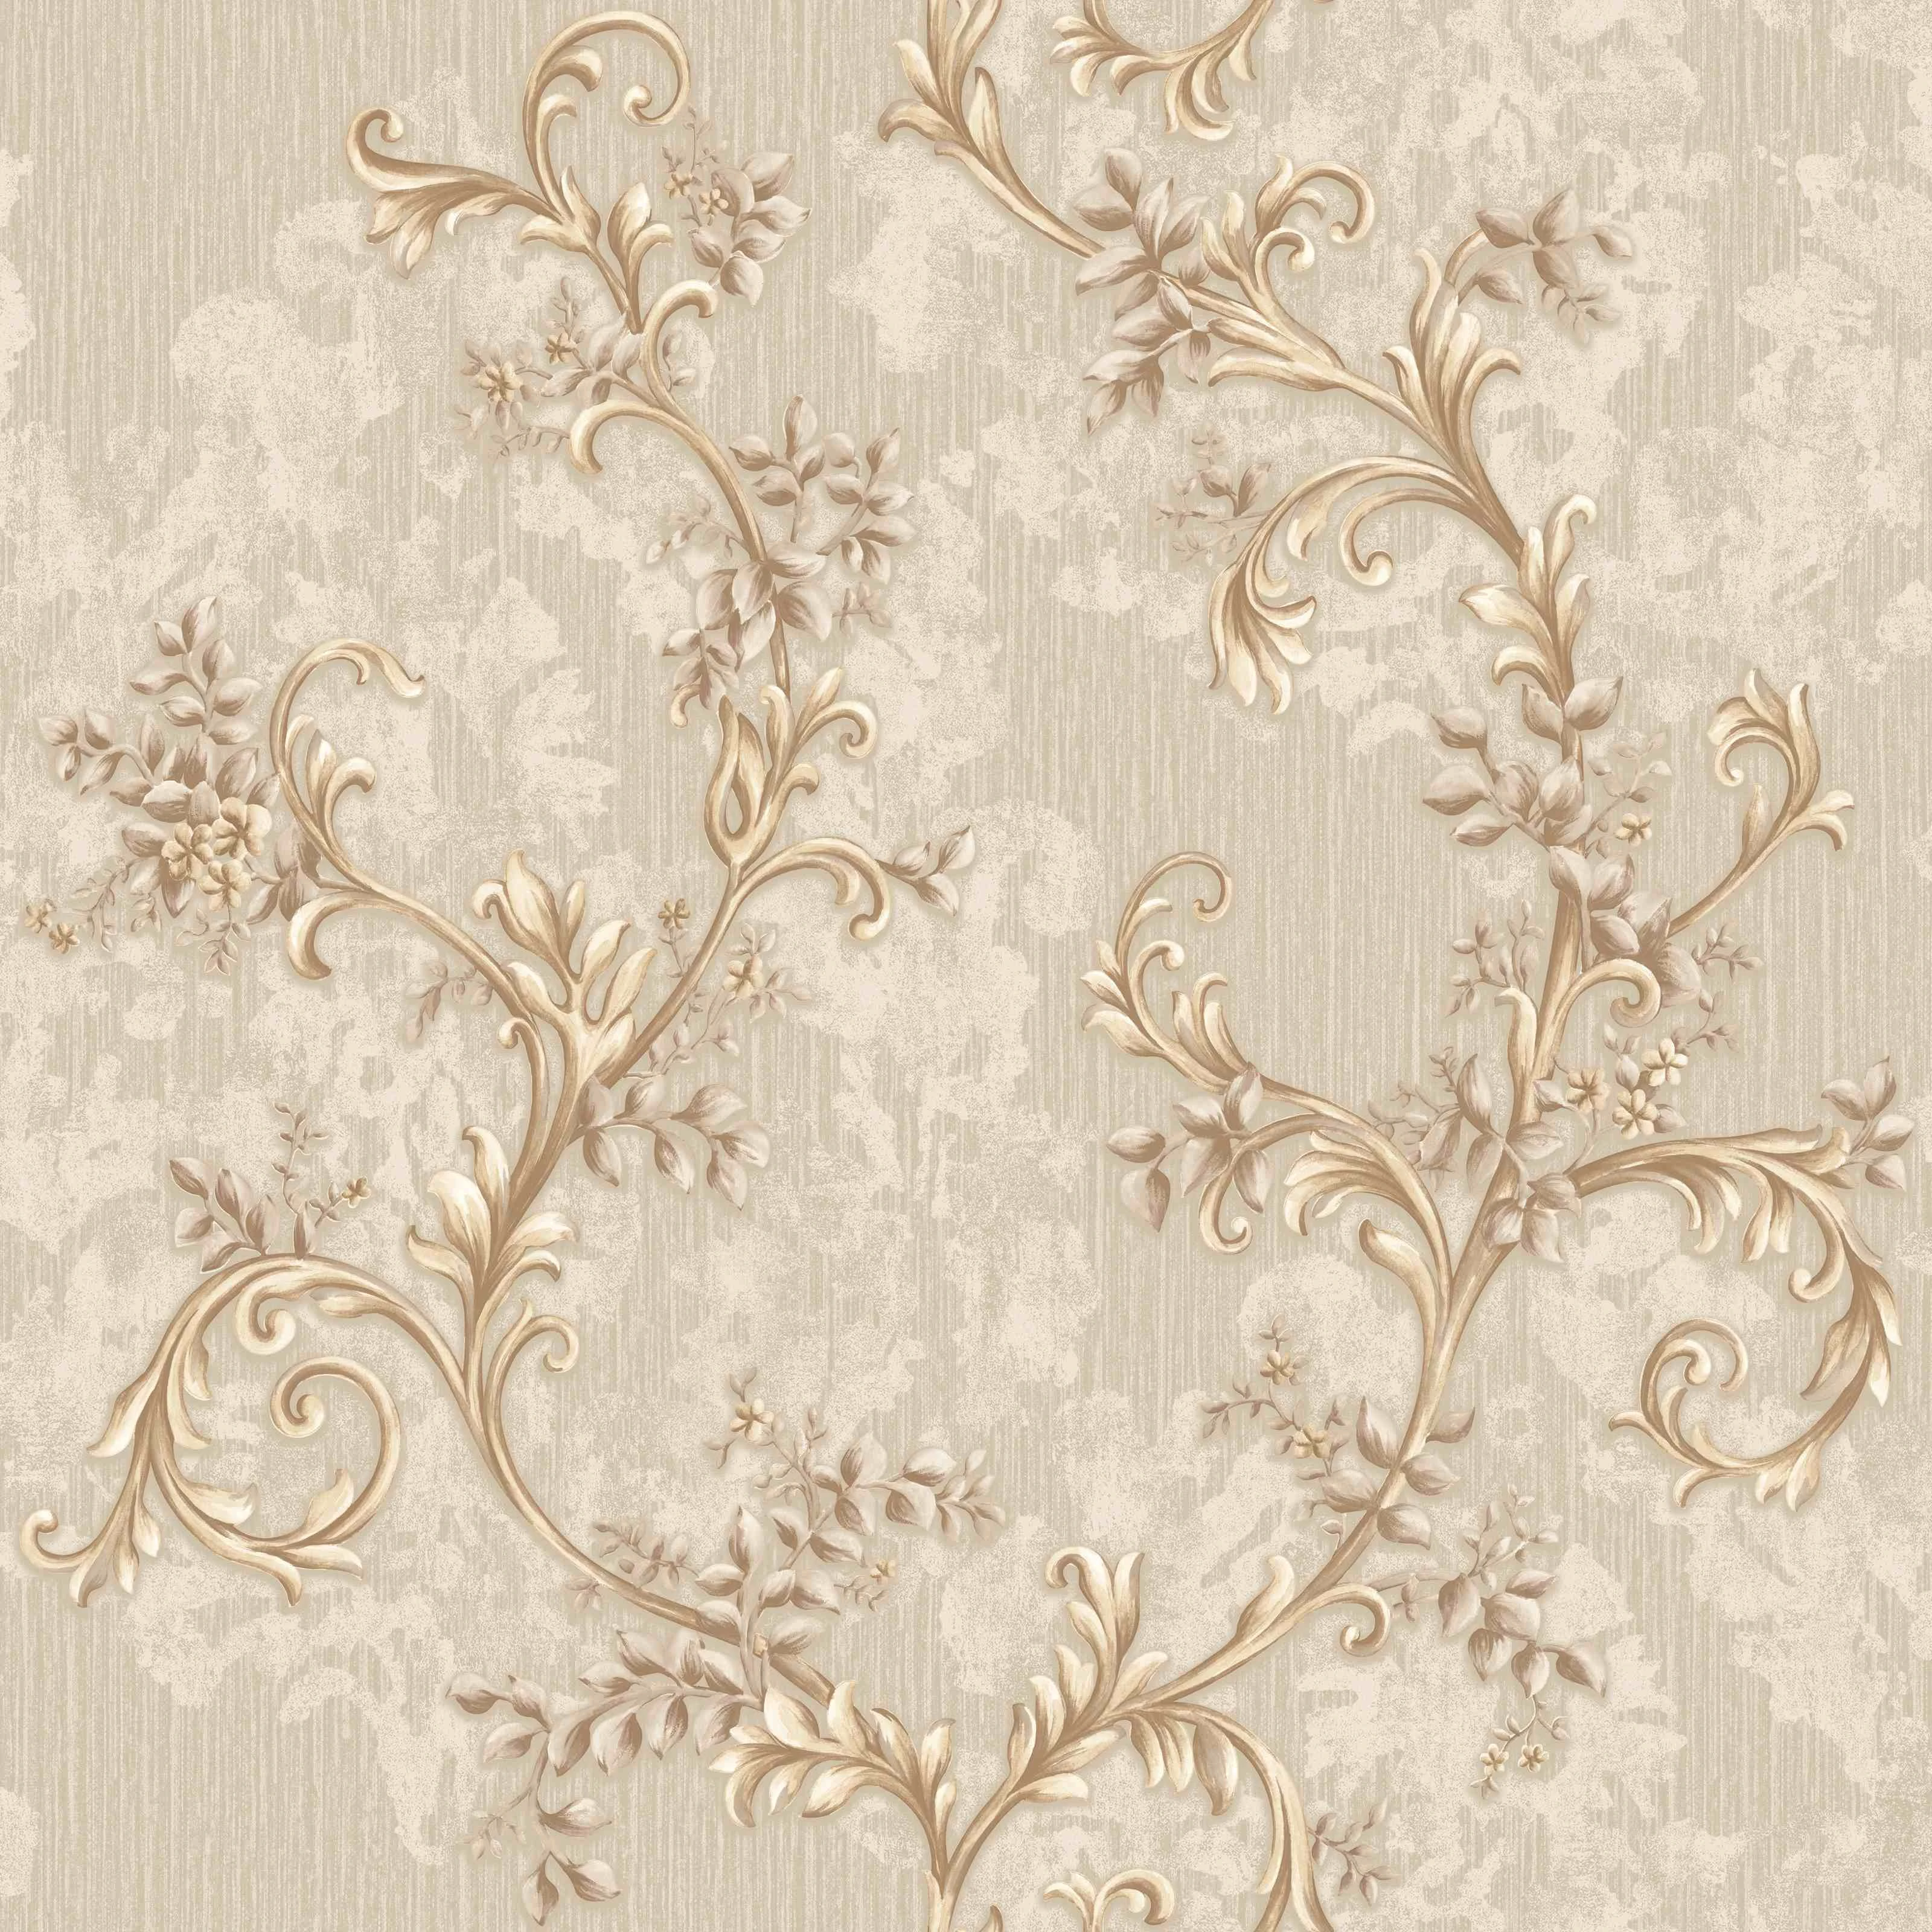 New 106cm wallpaper bedroom decoration PVC wallpaper with high quality